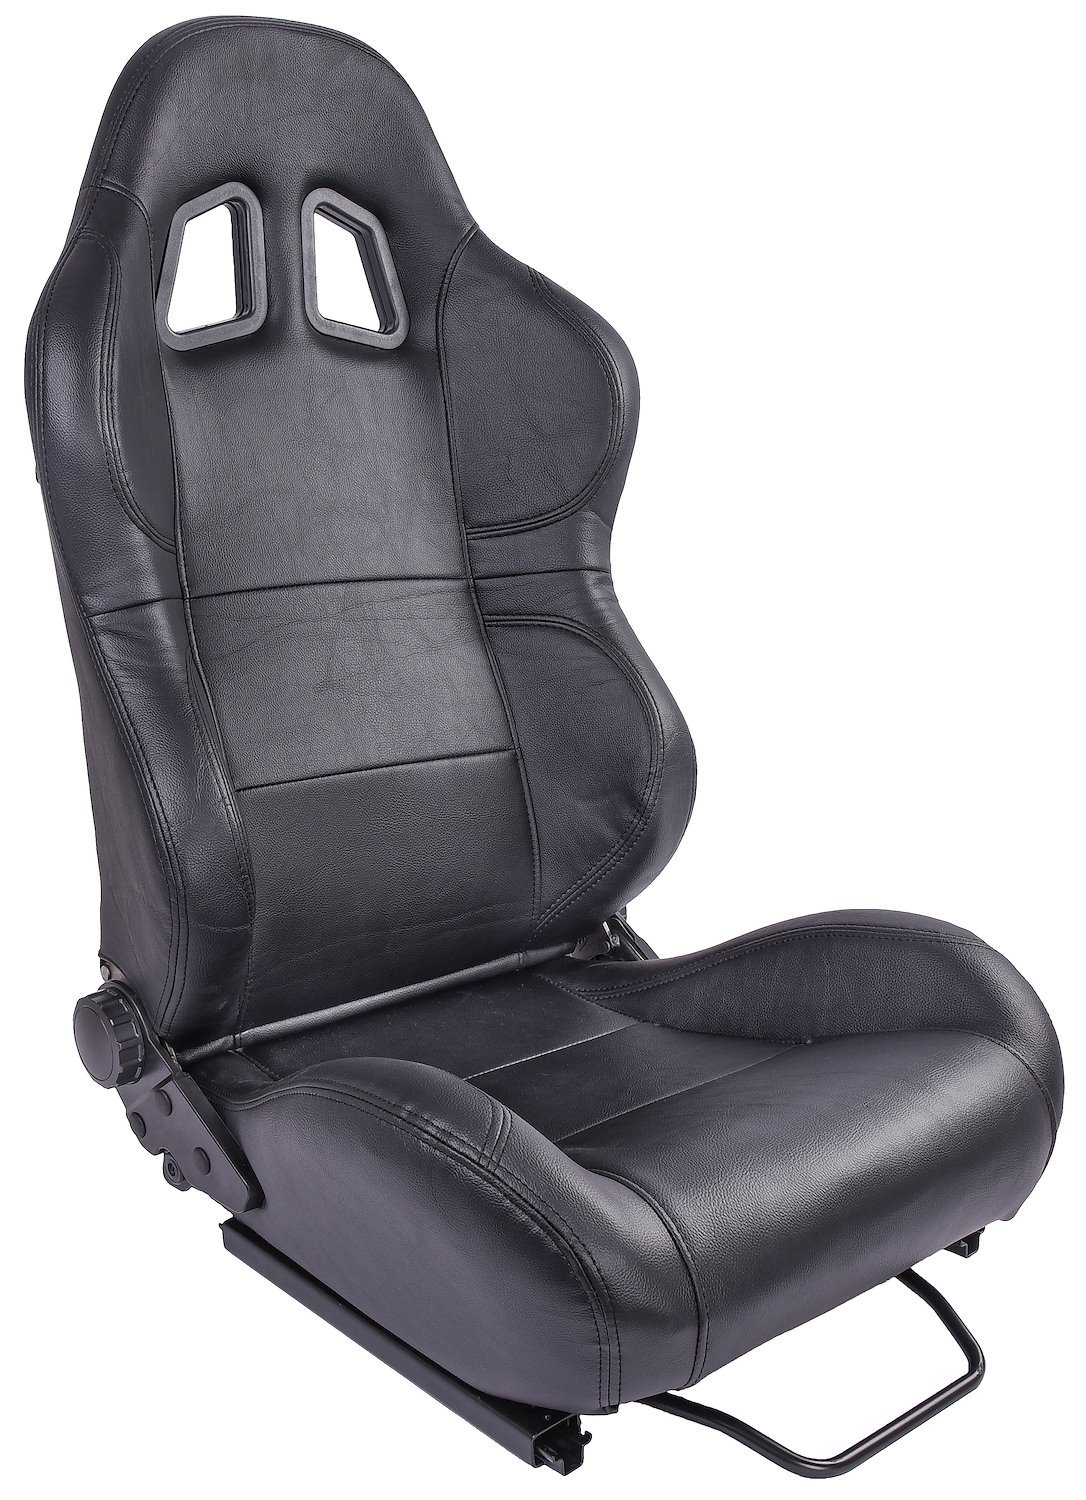 GS-1 High Back Sport Seat Driver or Passenger